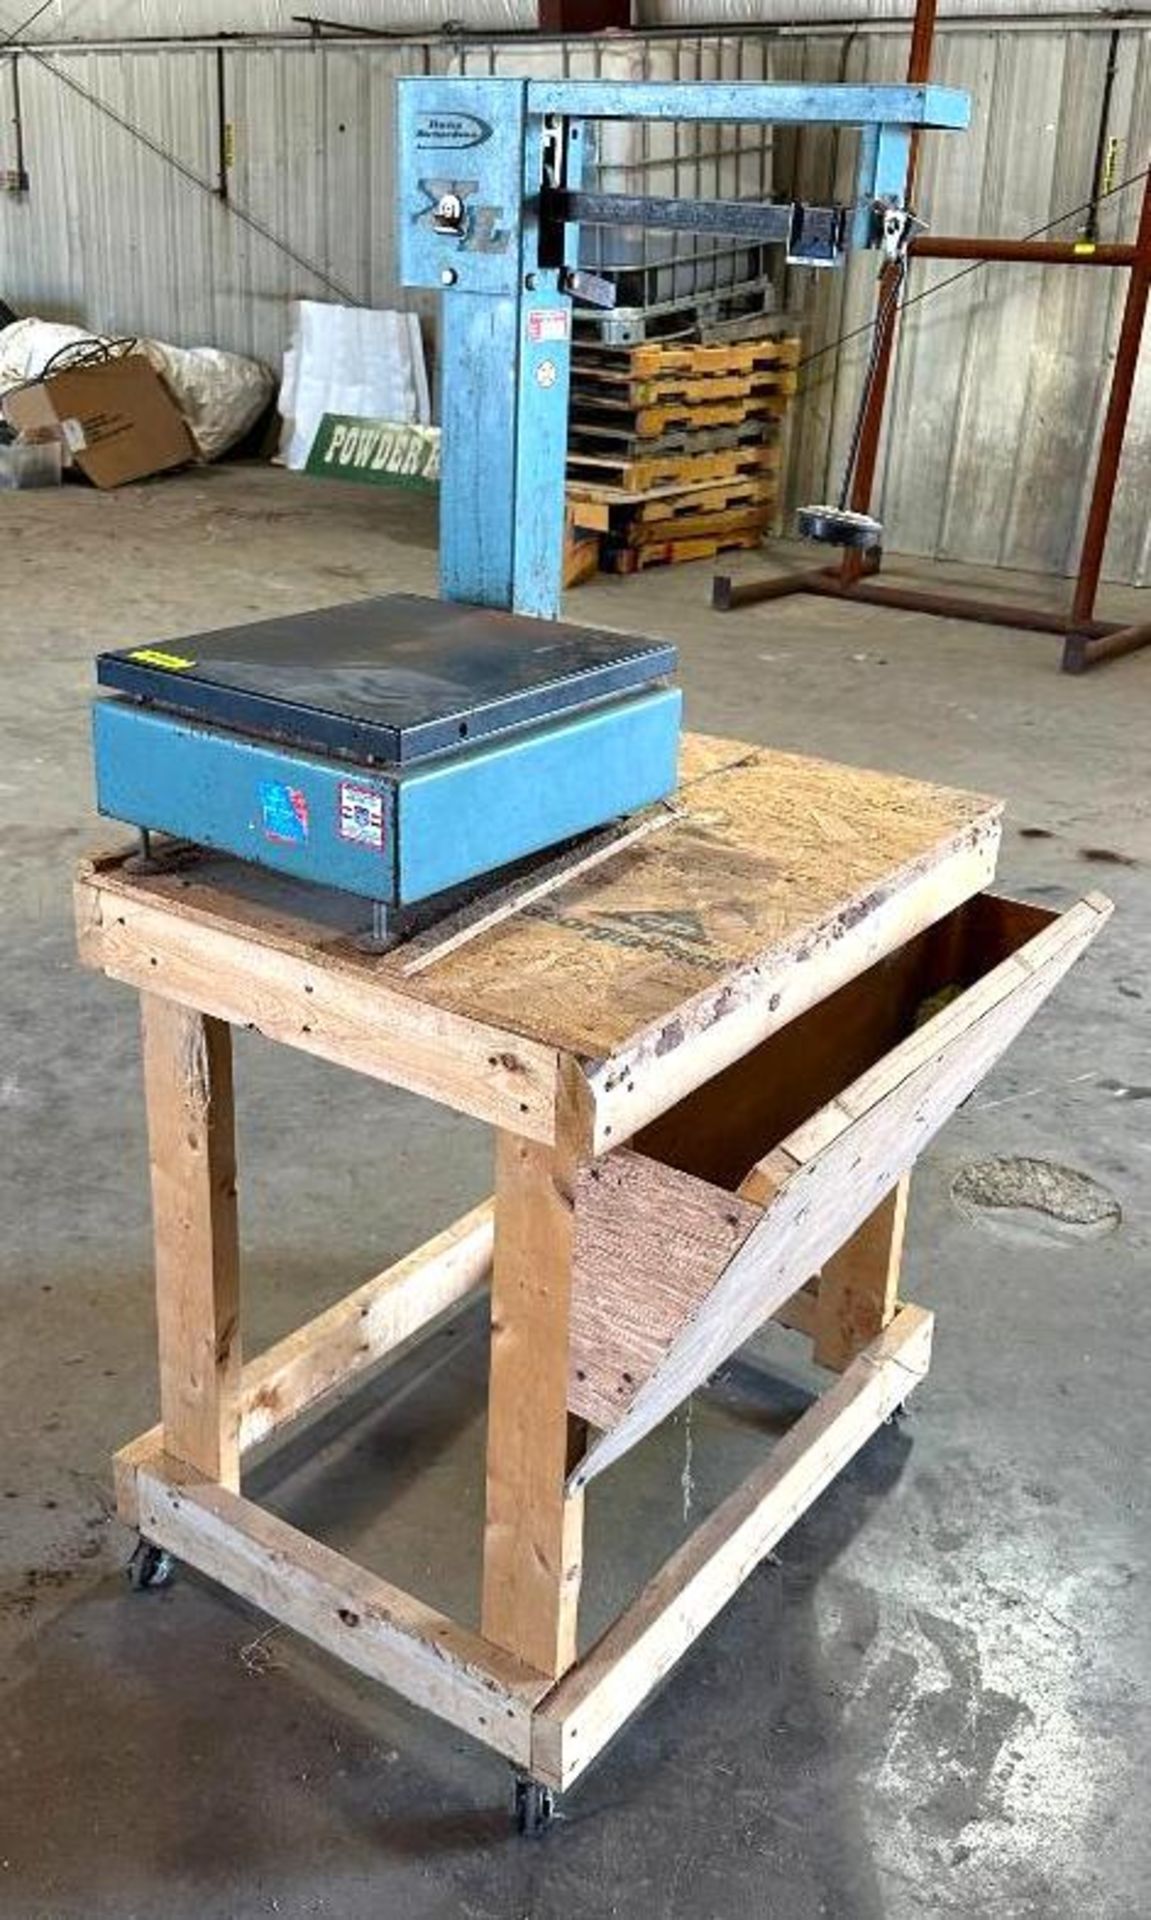 HOWE RICHARDSON 300LB CAPACITY SCALE W/ WOODEN STAND ON CASTERS BRAND/MODEL: HOWE RICHARDSON MODEL 5 - Image 2 of 8